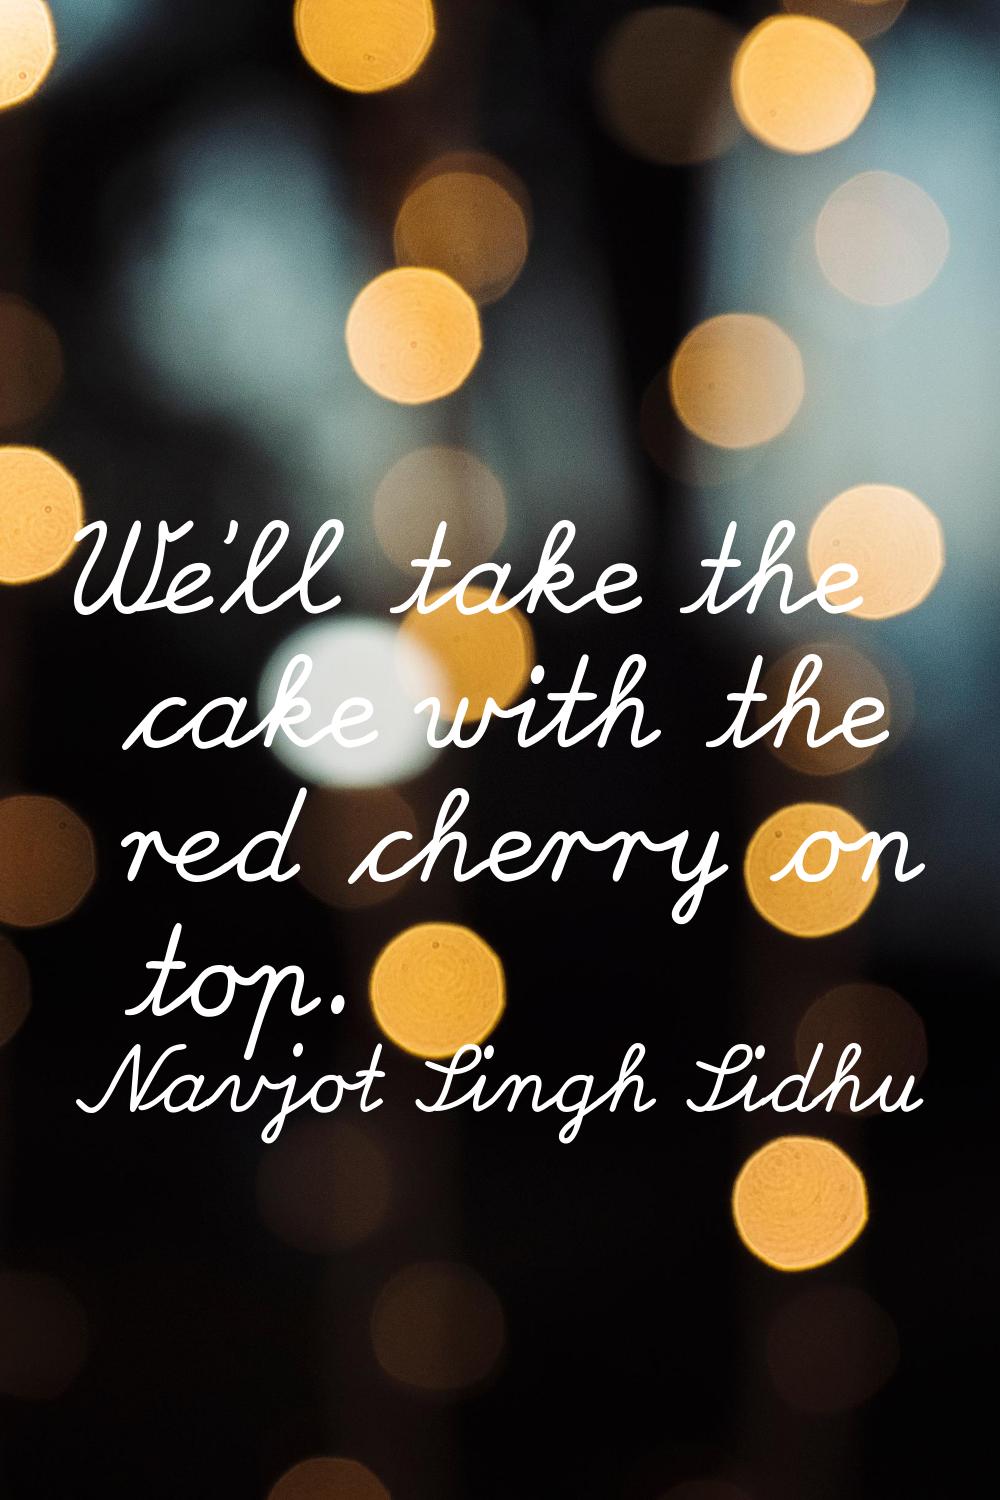 We'll take the cake with the red cherry on top.